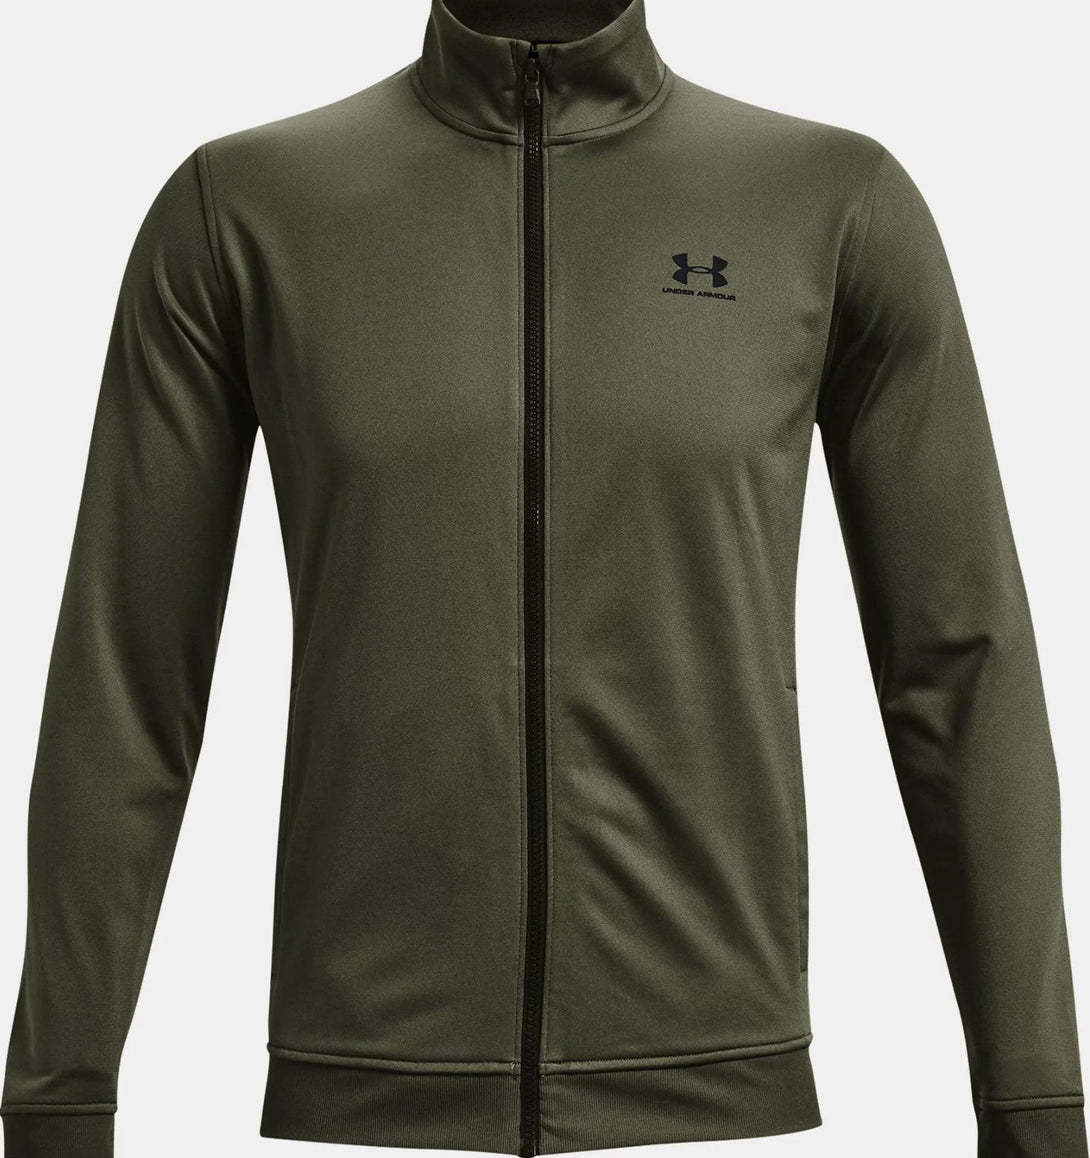 Rugby Heaven Under Armour Adults Sportstyle Tricot Jacket - www.rugby-heaven.co.uk